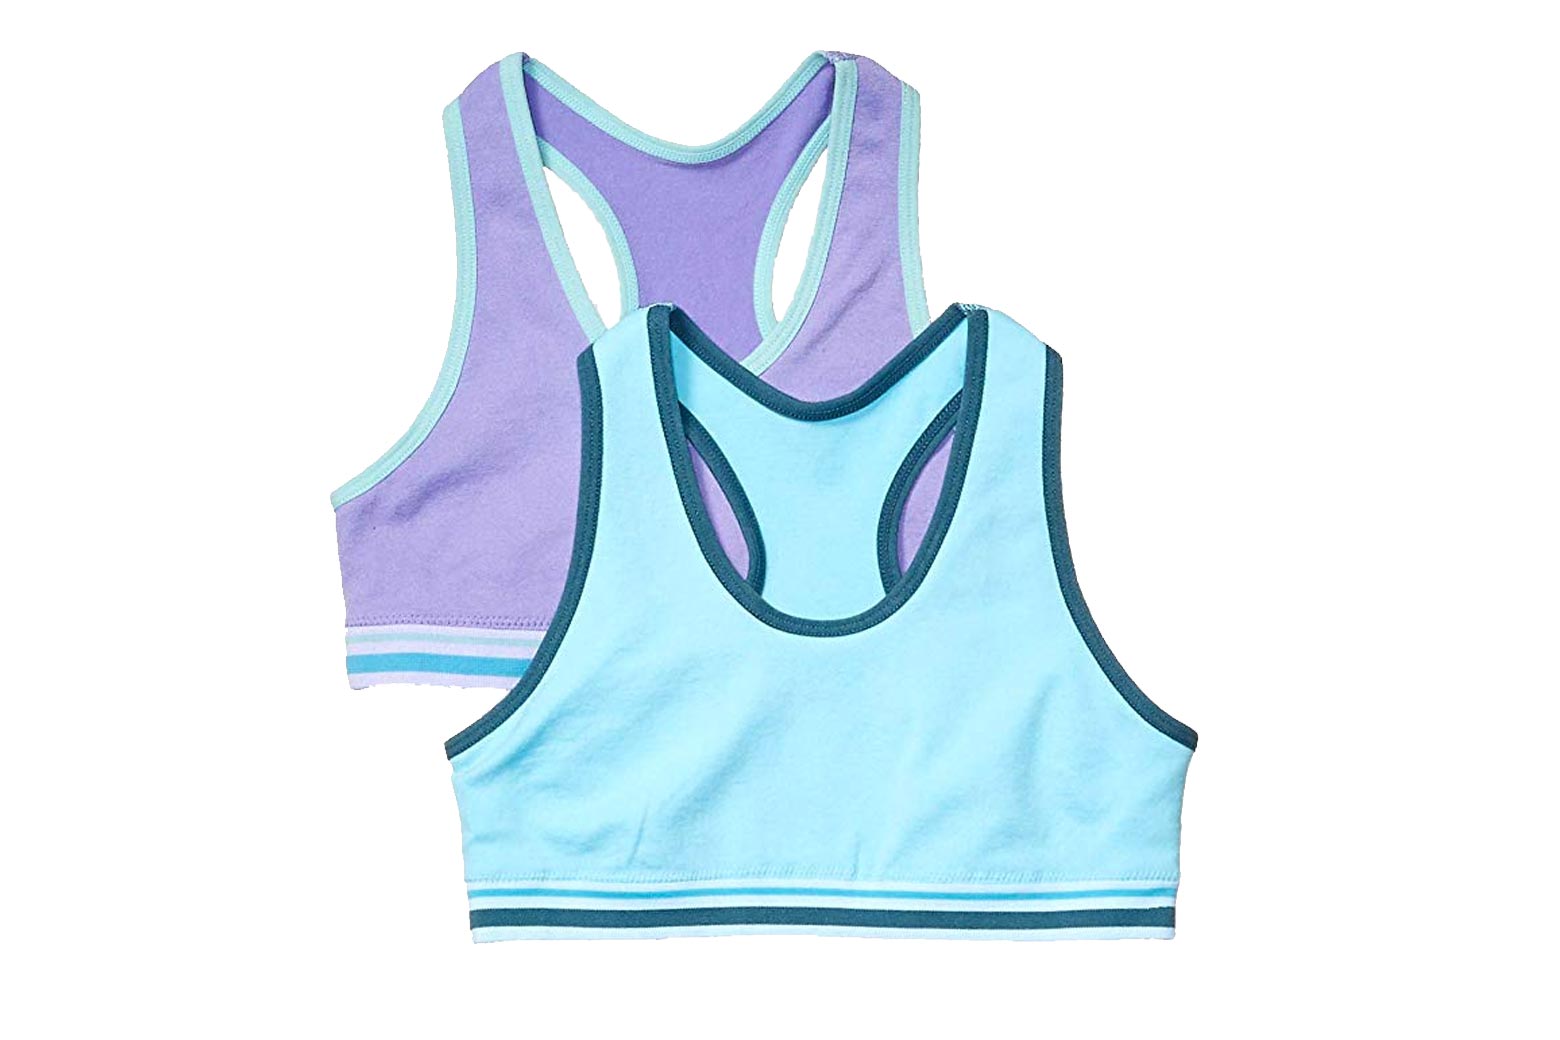 Why On Earth Aren't Sports Bras Part Of All Teen Girls' PE Kits